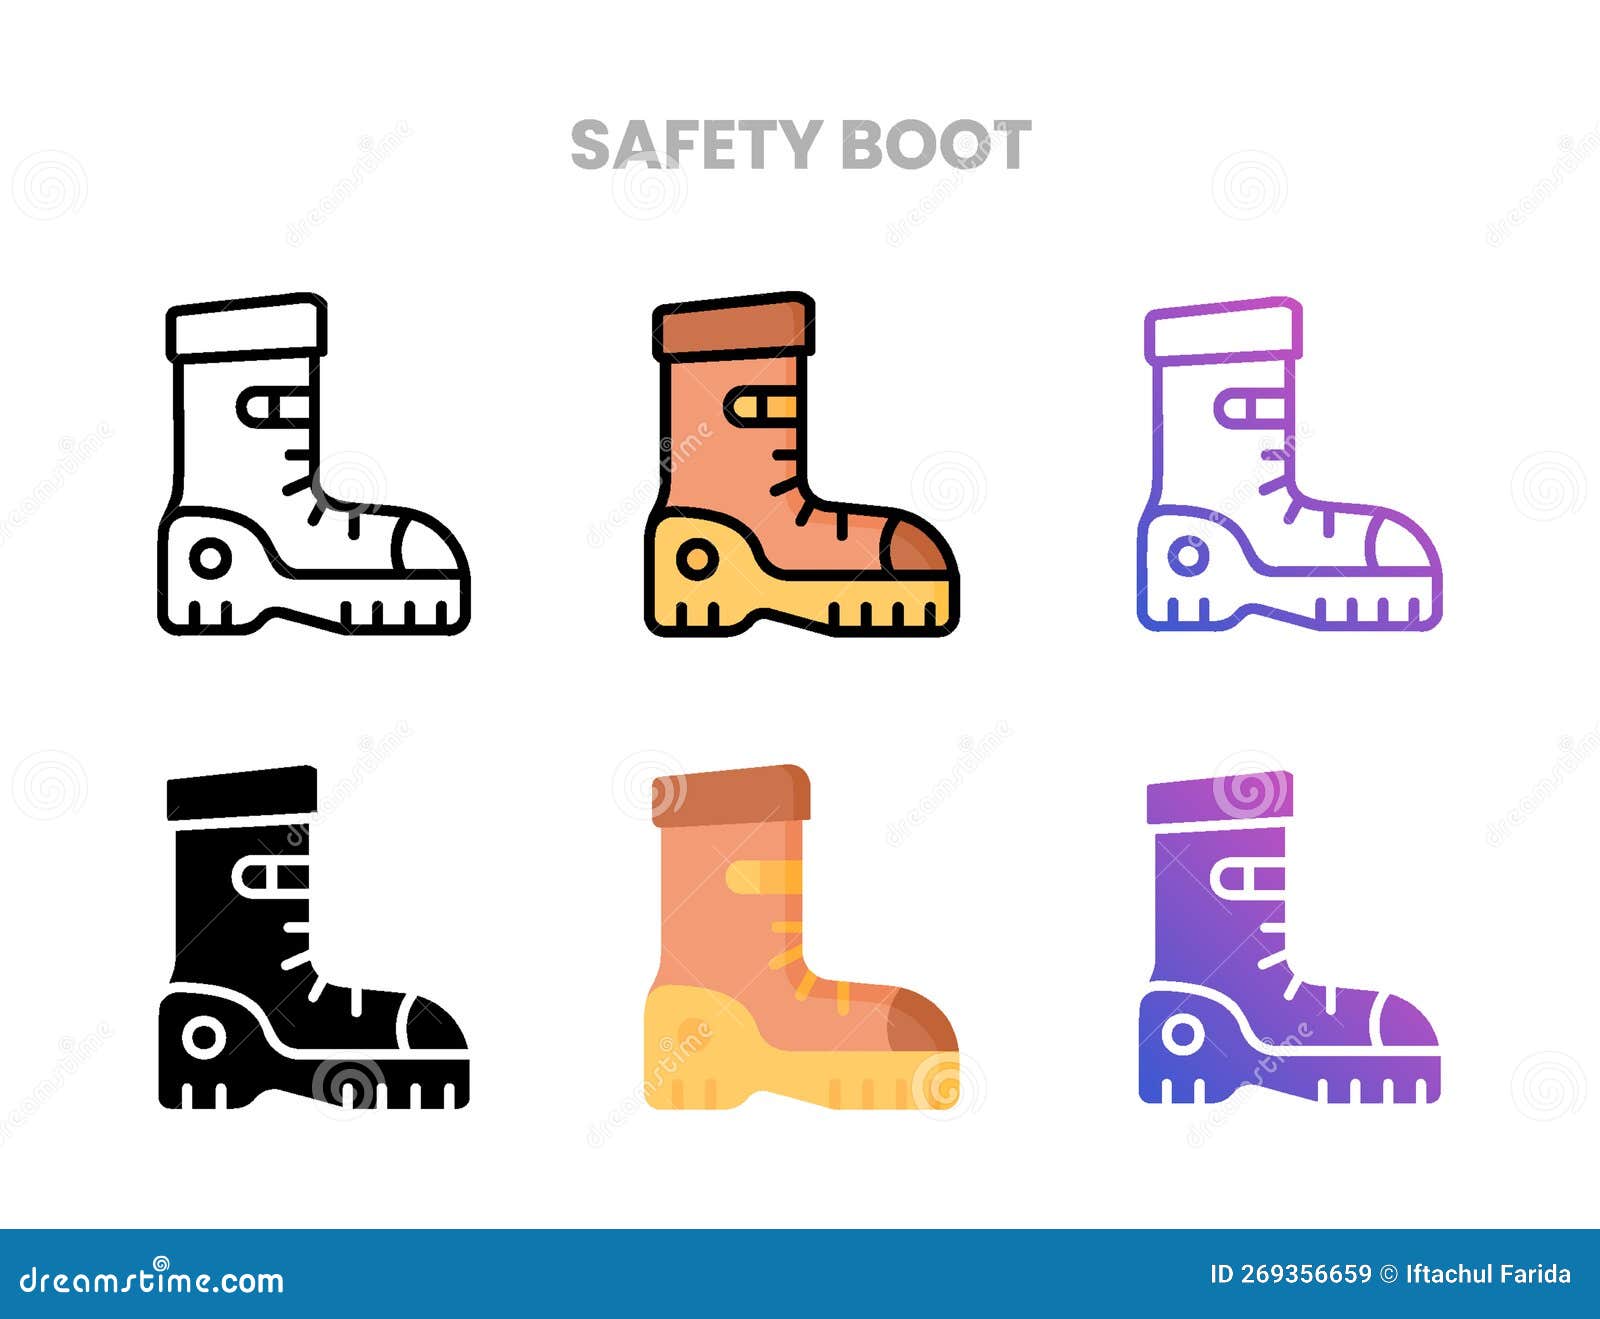 Safety Boot Icons Set with Different Styles. Stock Vector ...